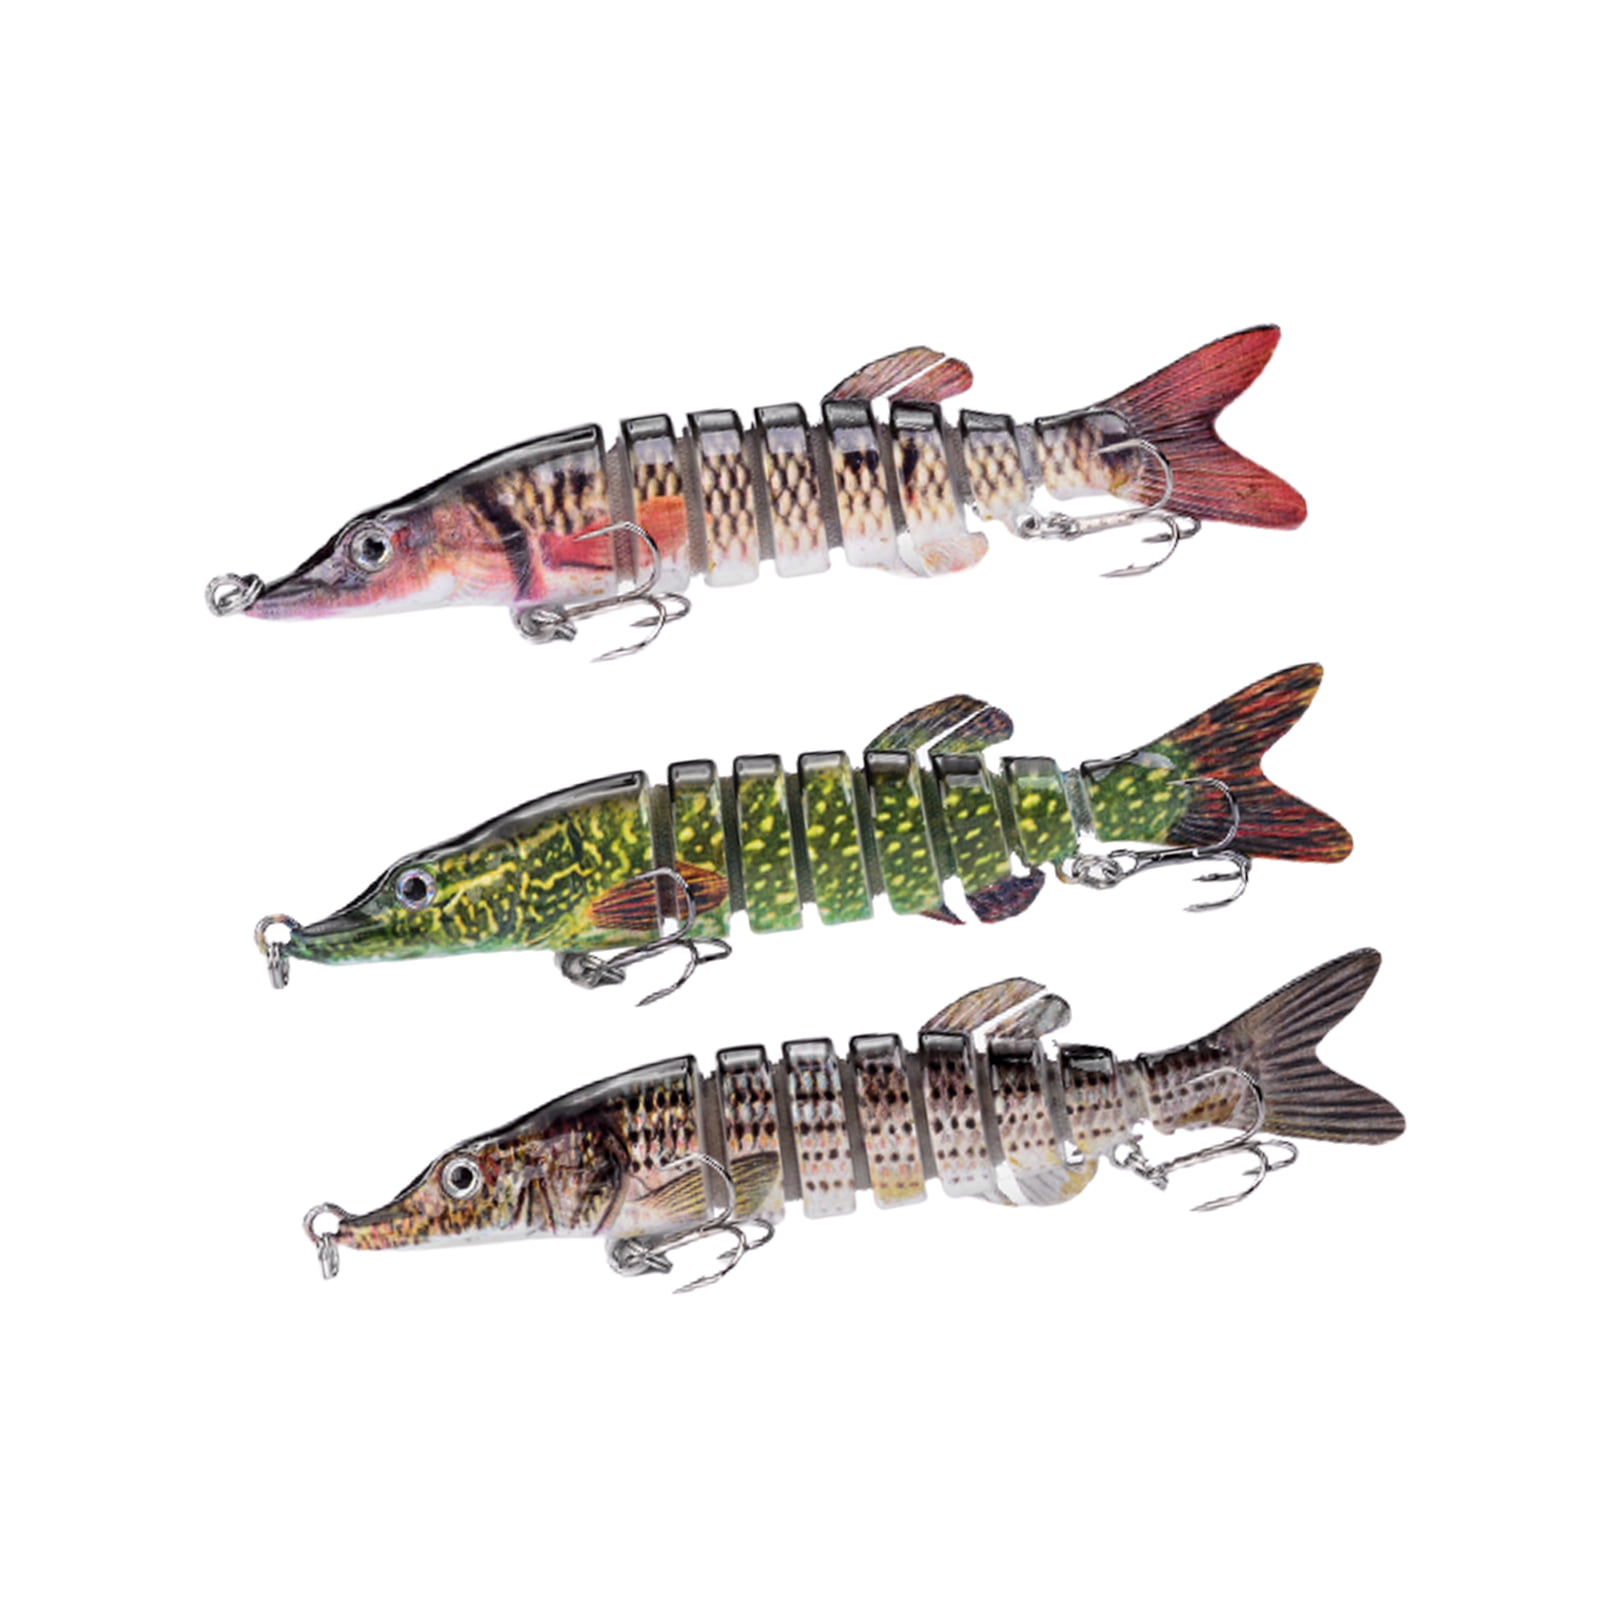 Cheers.US Lifelike Fishing Lures for Bass, Trout, Walleye, Predator Fish -  Realistic Multi Jointed Fish Popper Hooks Multi Jointed 8 Segments  Artificial Fishing Lure Swim Bait 